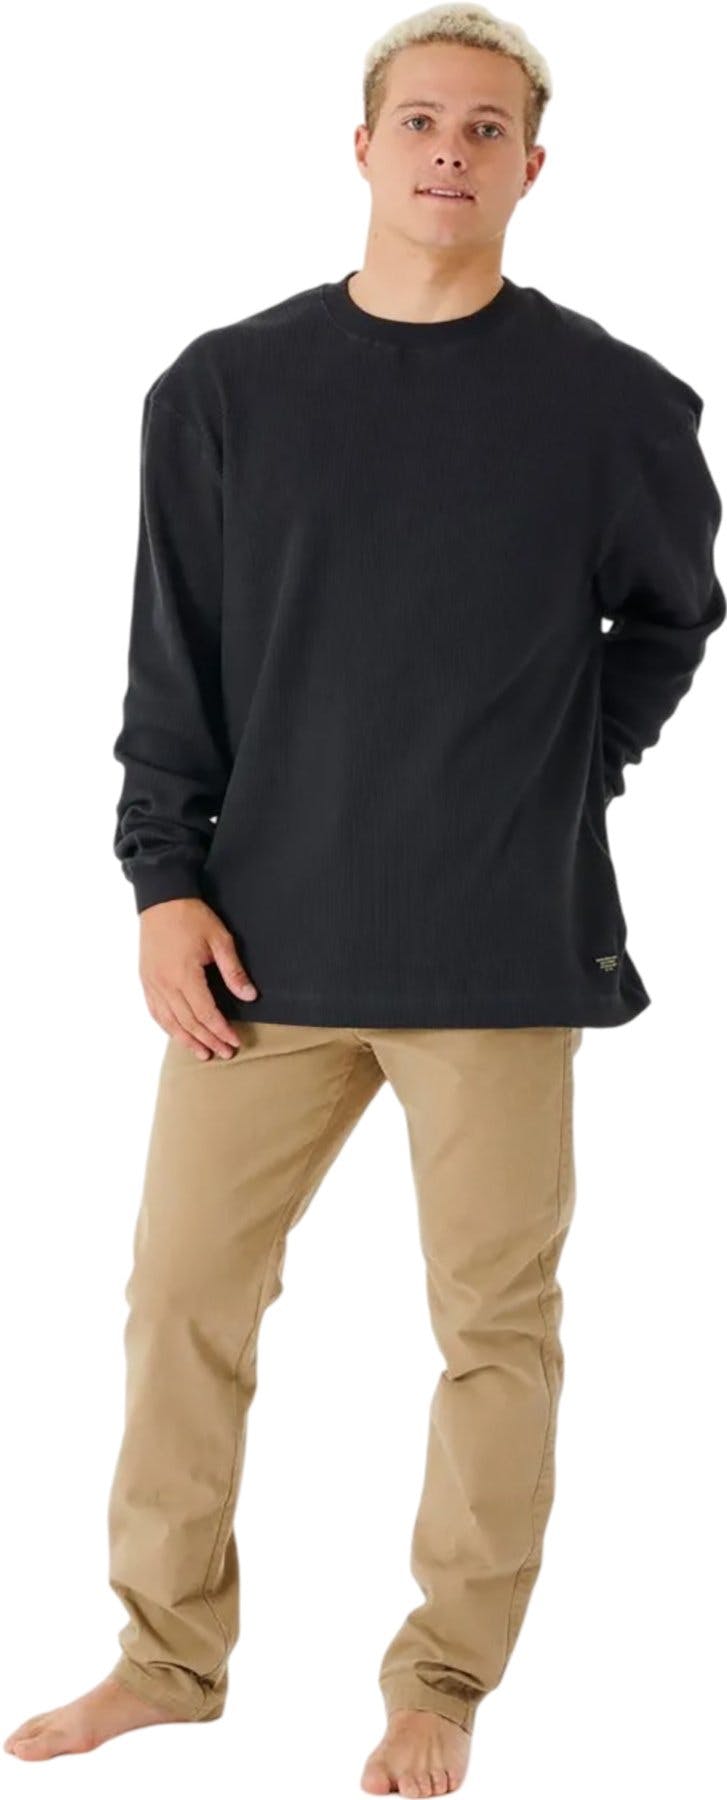 Product image for Quality Surf Products Long Sleeve Tee - Men's